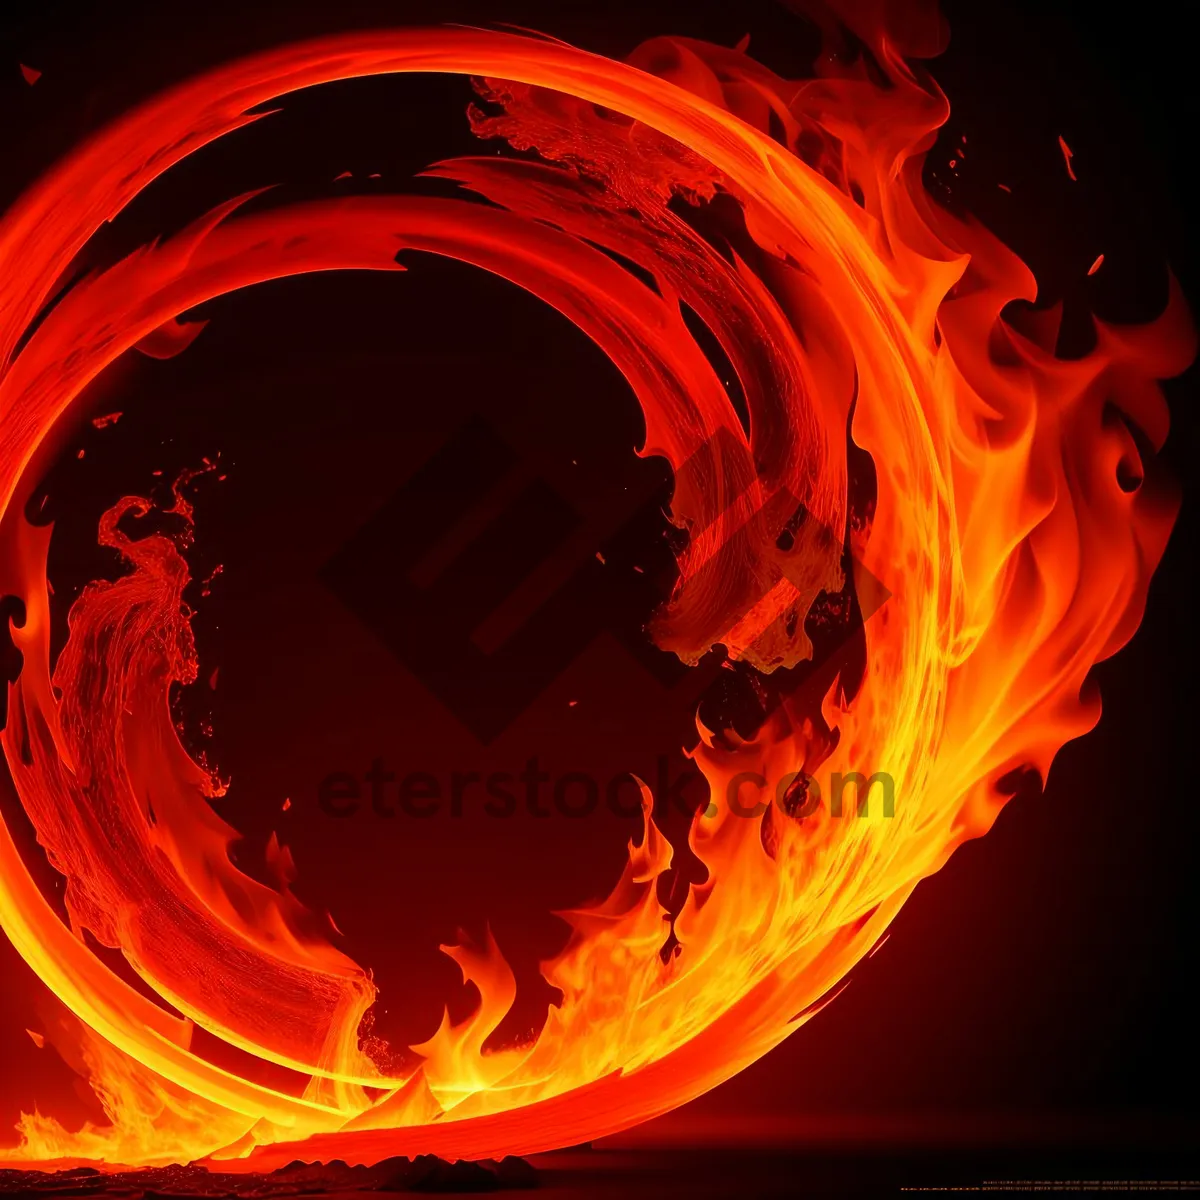 Picture of Fiery Fractal - Abstract Heat and Light Art Design